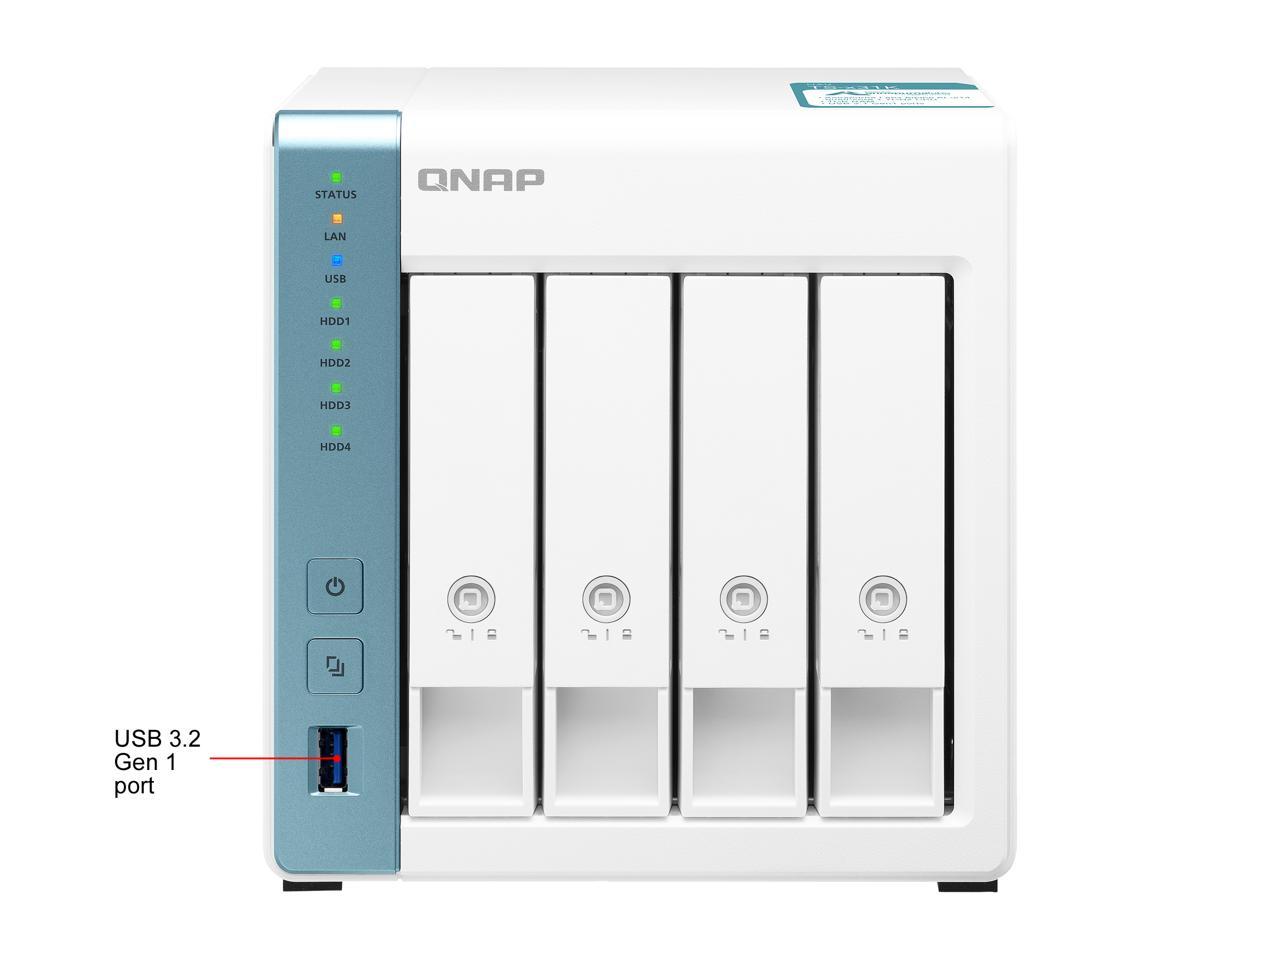 QNAP 4-Bay Personal Cloud NAS for Backup and Data Sharing 4-core 1.7GHz 1GB RAM w/ Lockable Drive Tray TS-431K-US